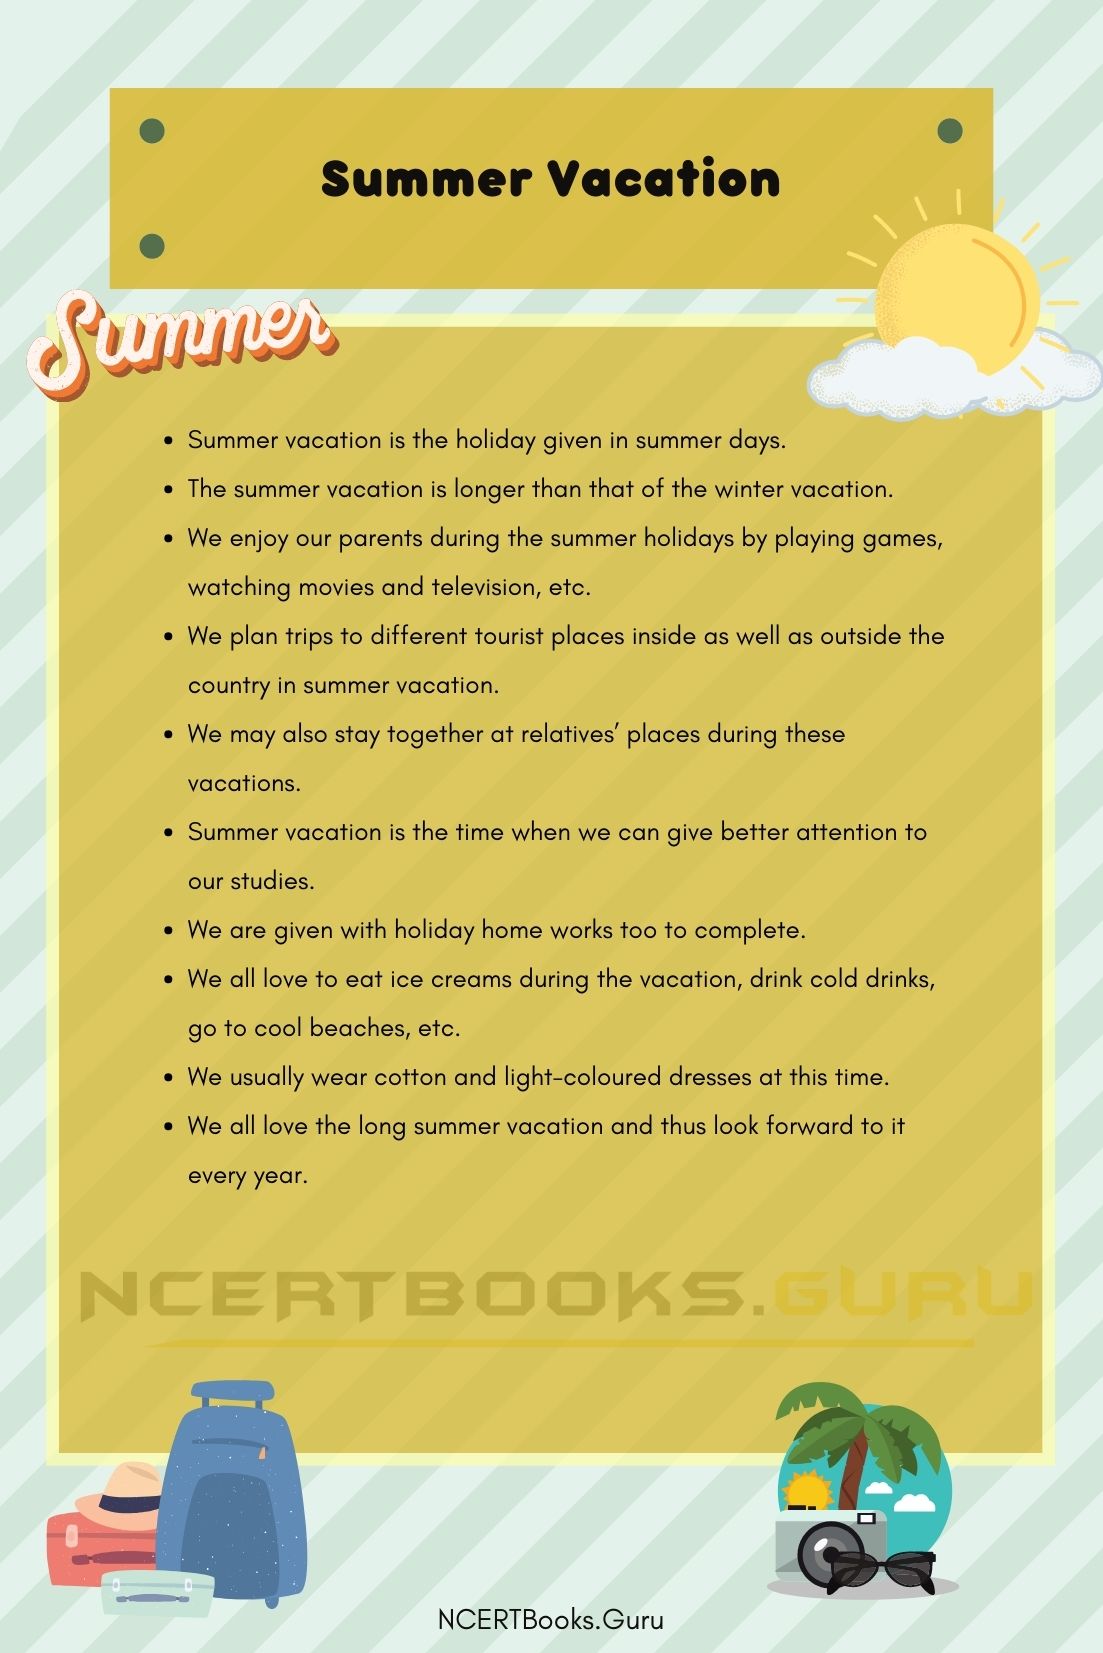 10 Lines on Summer Vacation 2